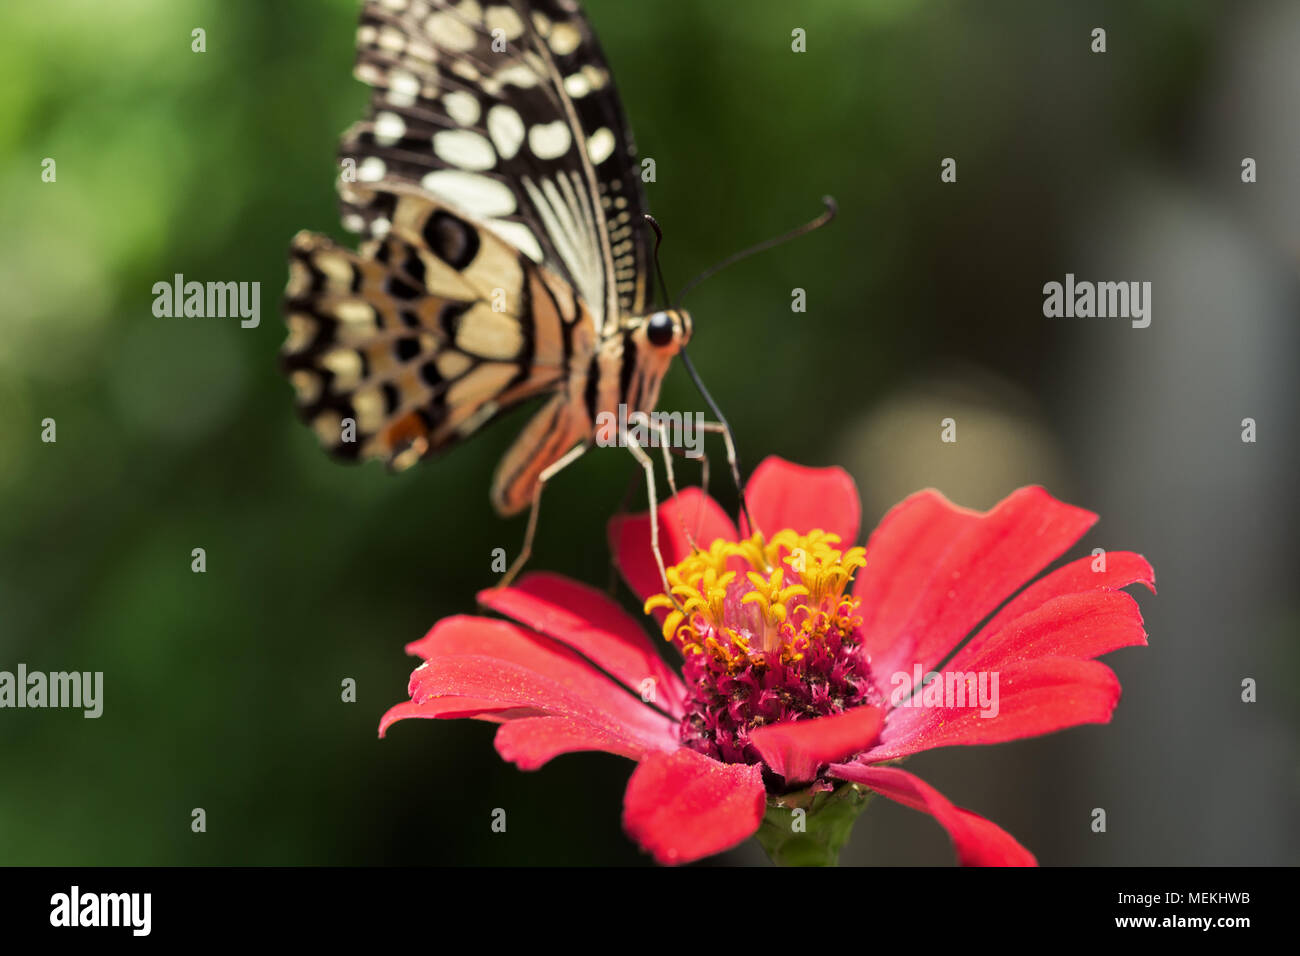 Papilio demoleus butterfly or Swallowtail Butterfly, Lime Swallowtail and the Chequered Swallowtail. Close-up photo of feeding butterfly on Zinnia Stock Photo